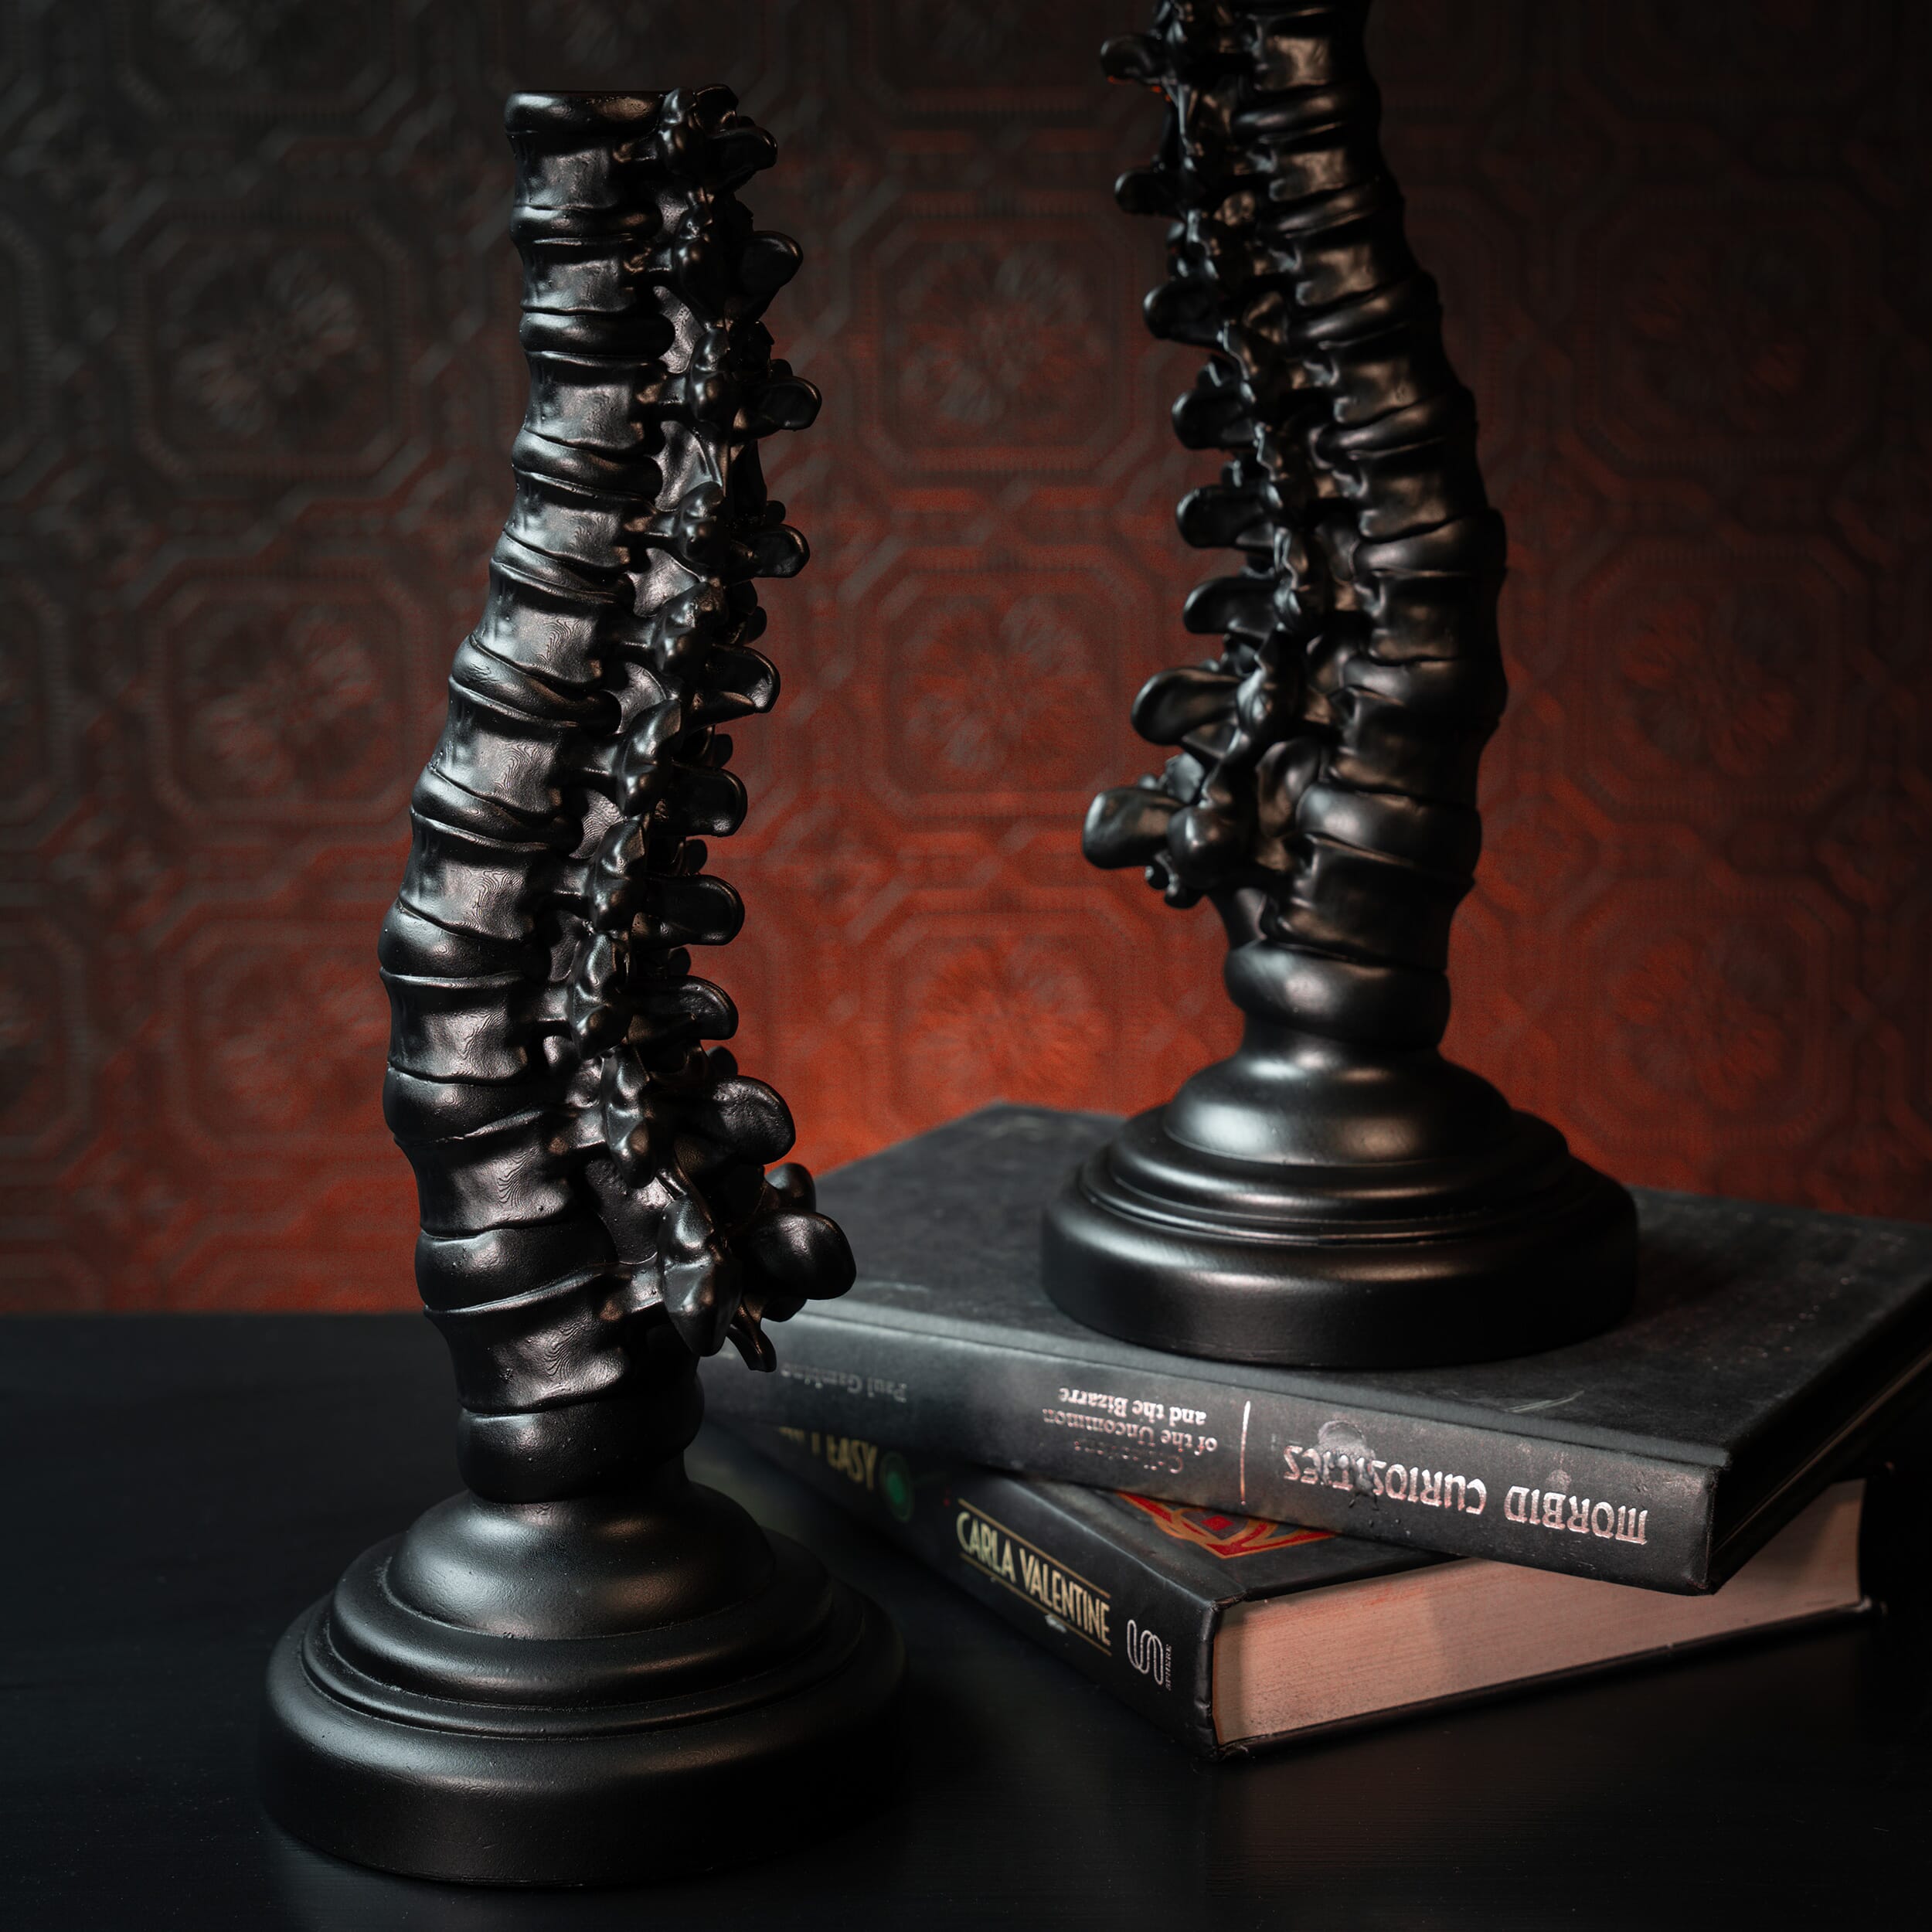 Gothic candlestick holders  Gothic candles, Goth home decor, Creepy candles